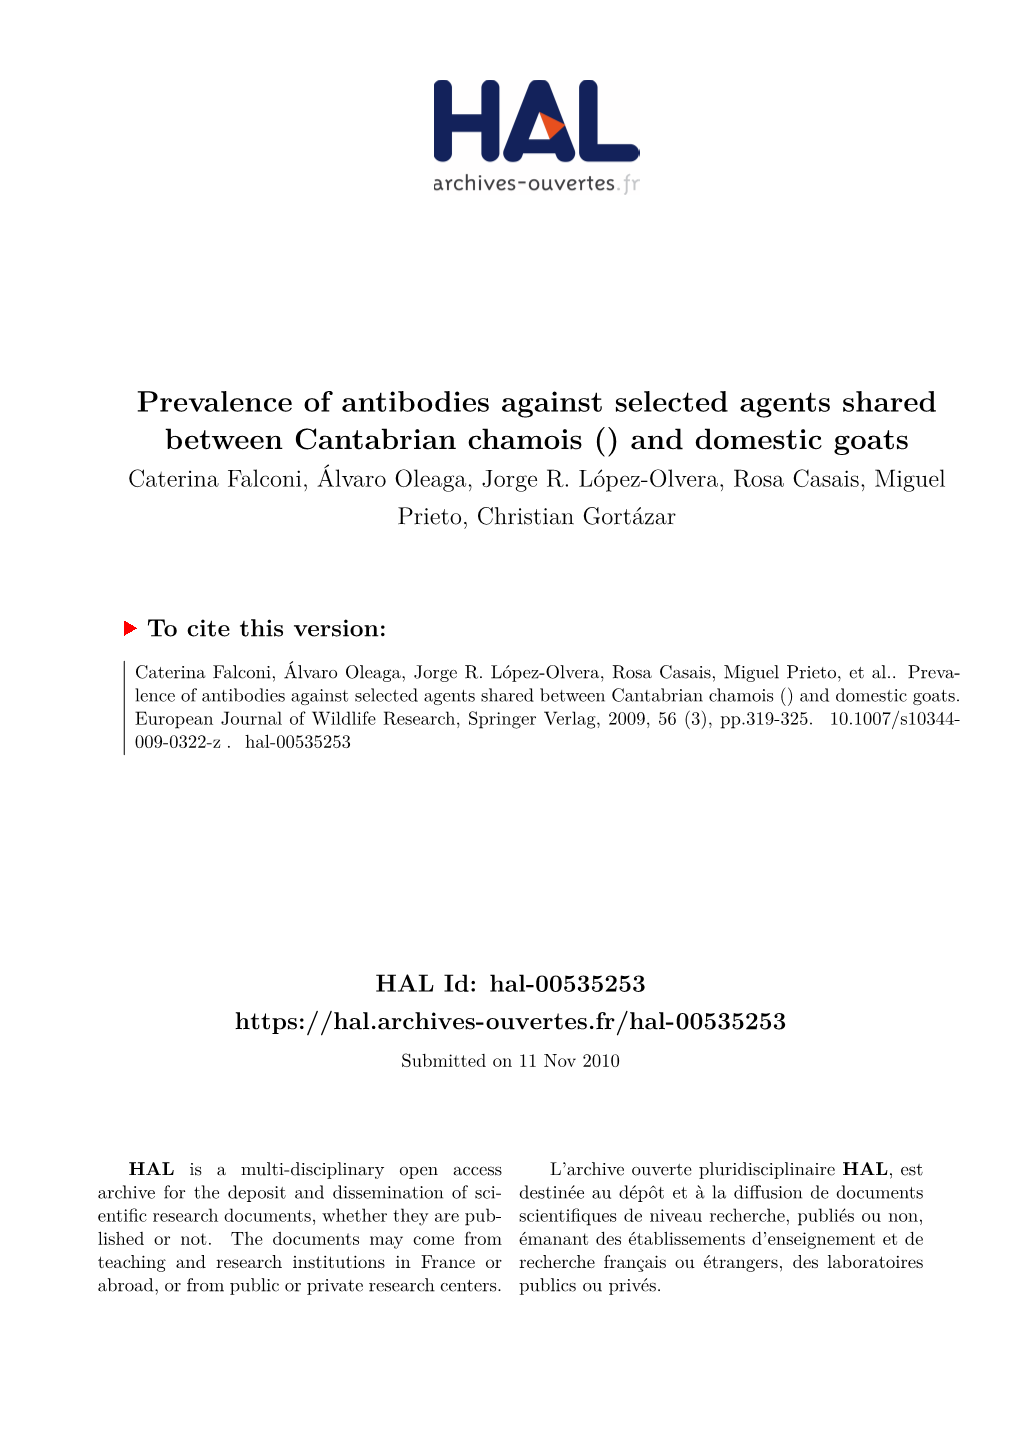 Prevalence of Antibodies Against Selected Agents Shared Between Cantabrian Chamois () and Domestic Goats Caterina Falconi, Álvaro Oleaga, Jorge R